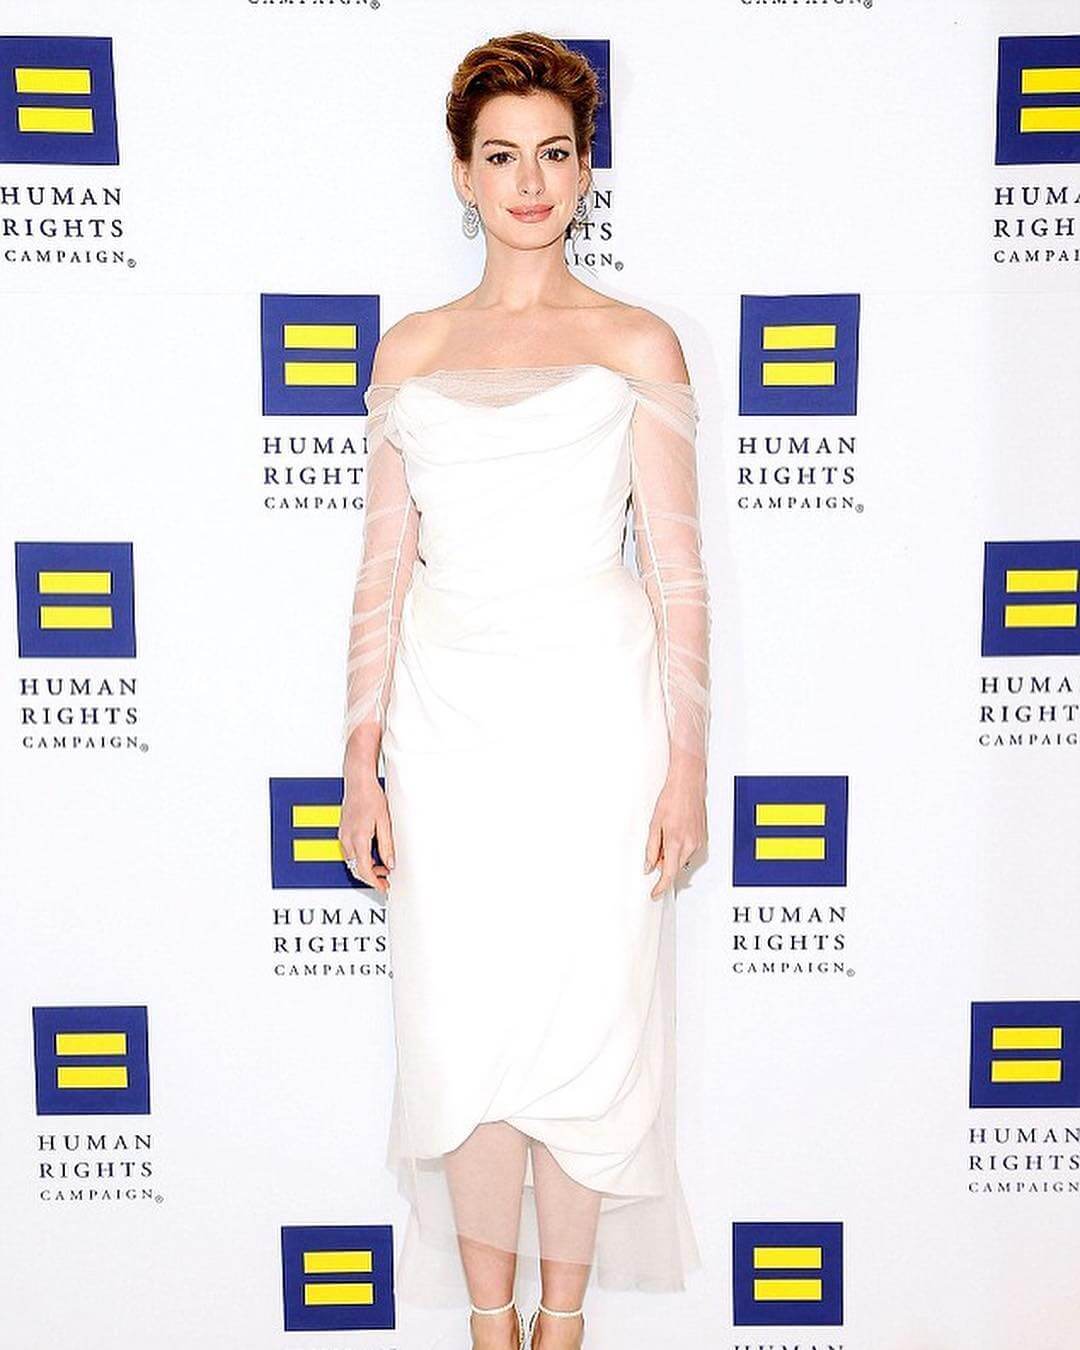  "Anne In A Etheral White Dress Is A Goddess"